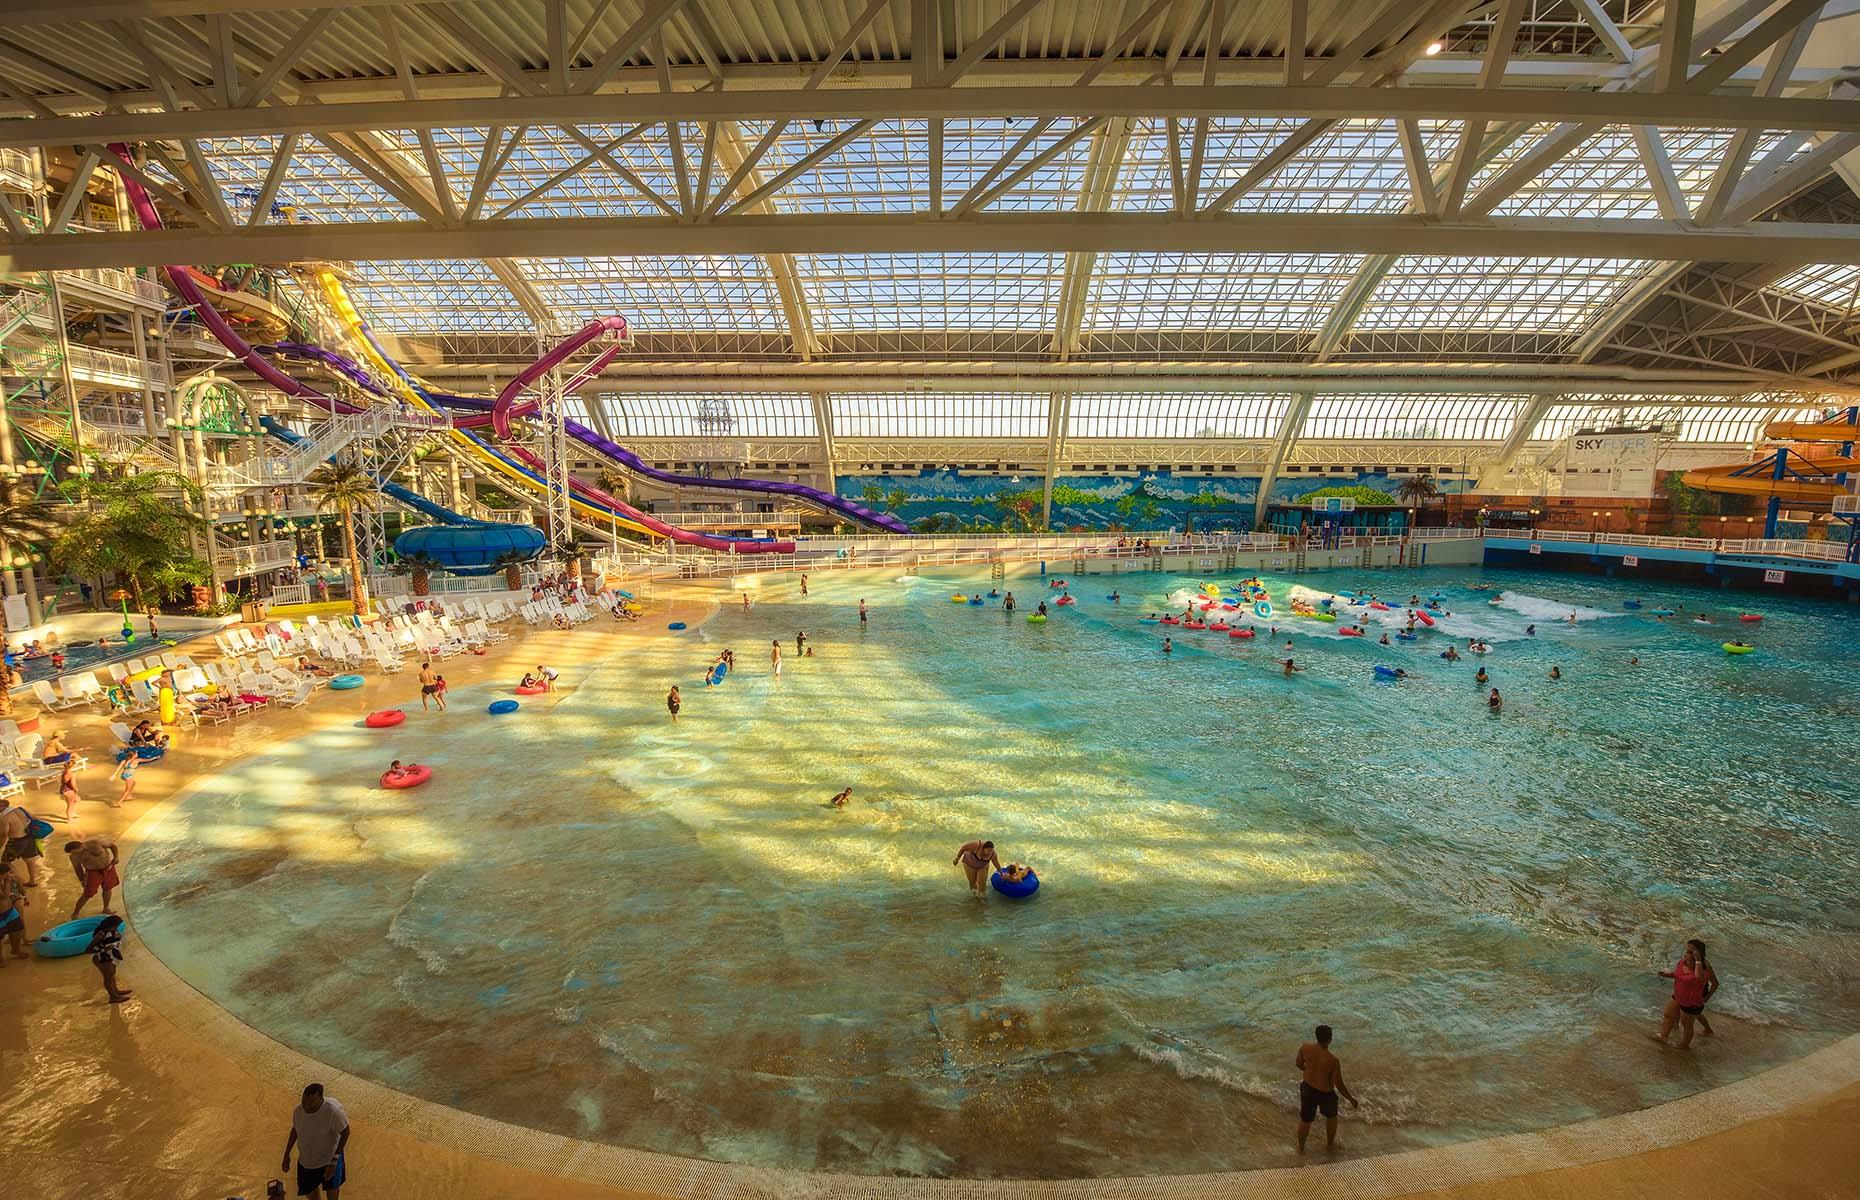 <p>Had enough of shopping? Then pop into West Edmonton Mall's <a href="https://www.wem.ca/play/attractions/world-waterpark">World Waterpark</a> where you'll find the world's largest indoor wave and more than 17 waterslides. Divided into four levels – beginner, intermediate, advanced and extreme – the slides range from kid-friendly Caribbean Cove and Splash Pad, while thrill-seekers will love the Sky Screamer. Reaching a speed of 37 miles per hour (60km/h) and with a 85-foot-drop (26m), it's definitely not for the faint-hearted.</p>